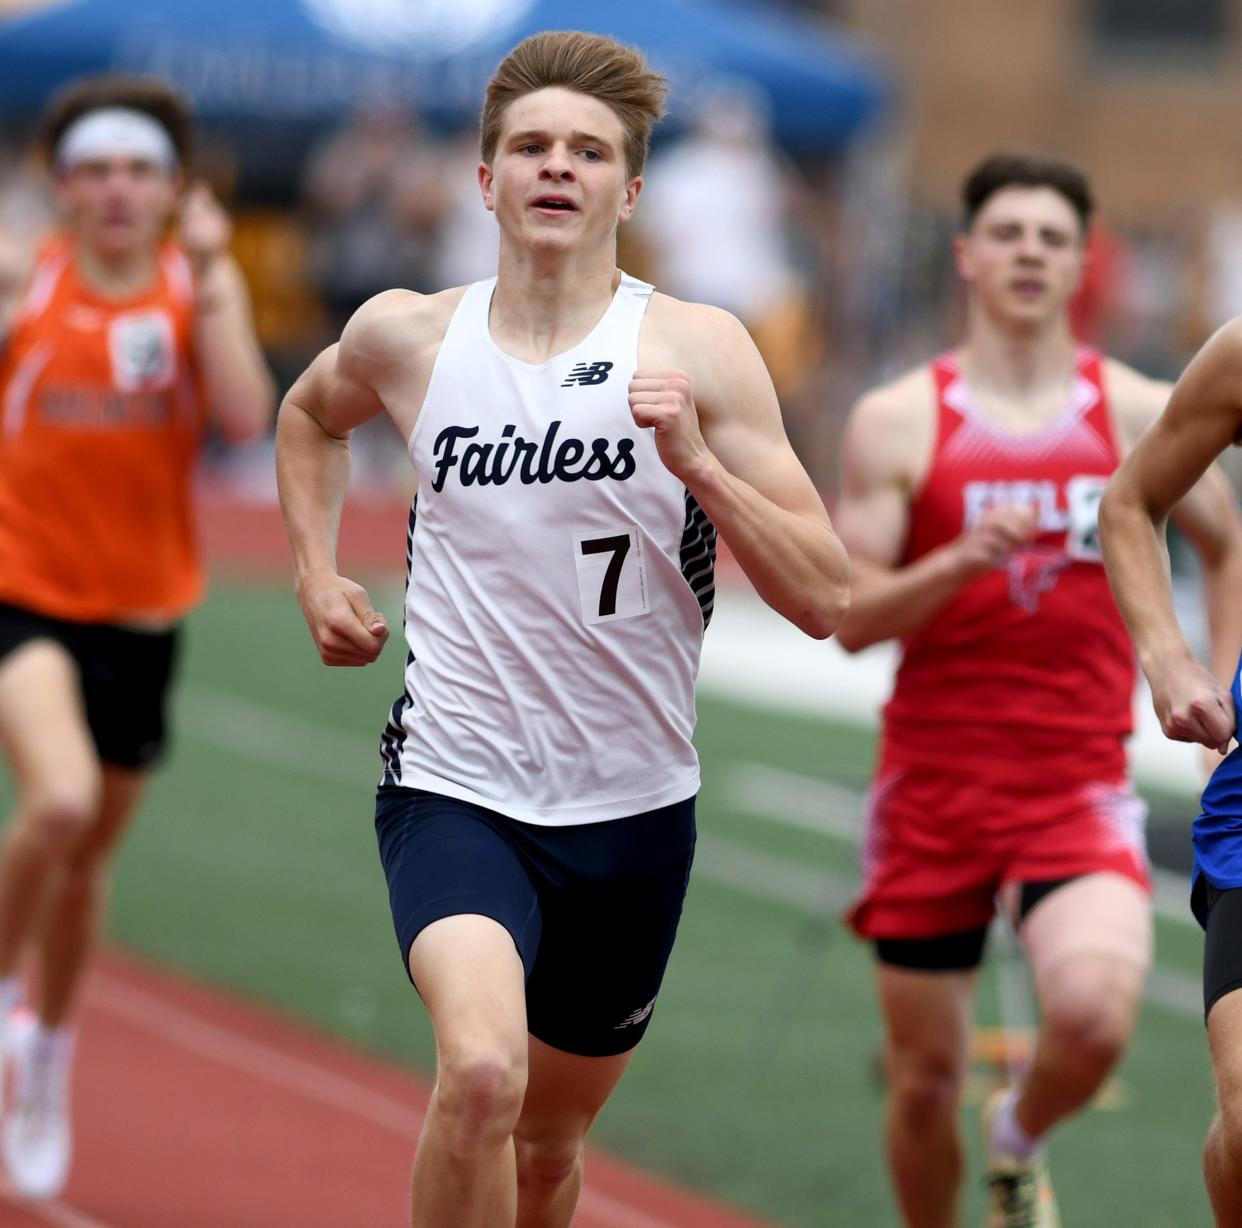 A district meet record of 1:54.94 pushed Fairless' Brody Pumneo to No. 1 in the county in the 800-meter run.